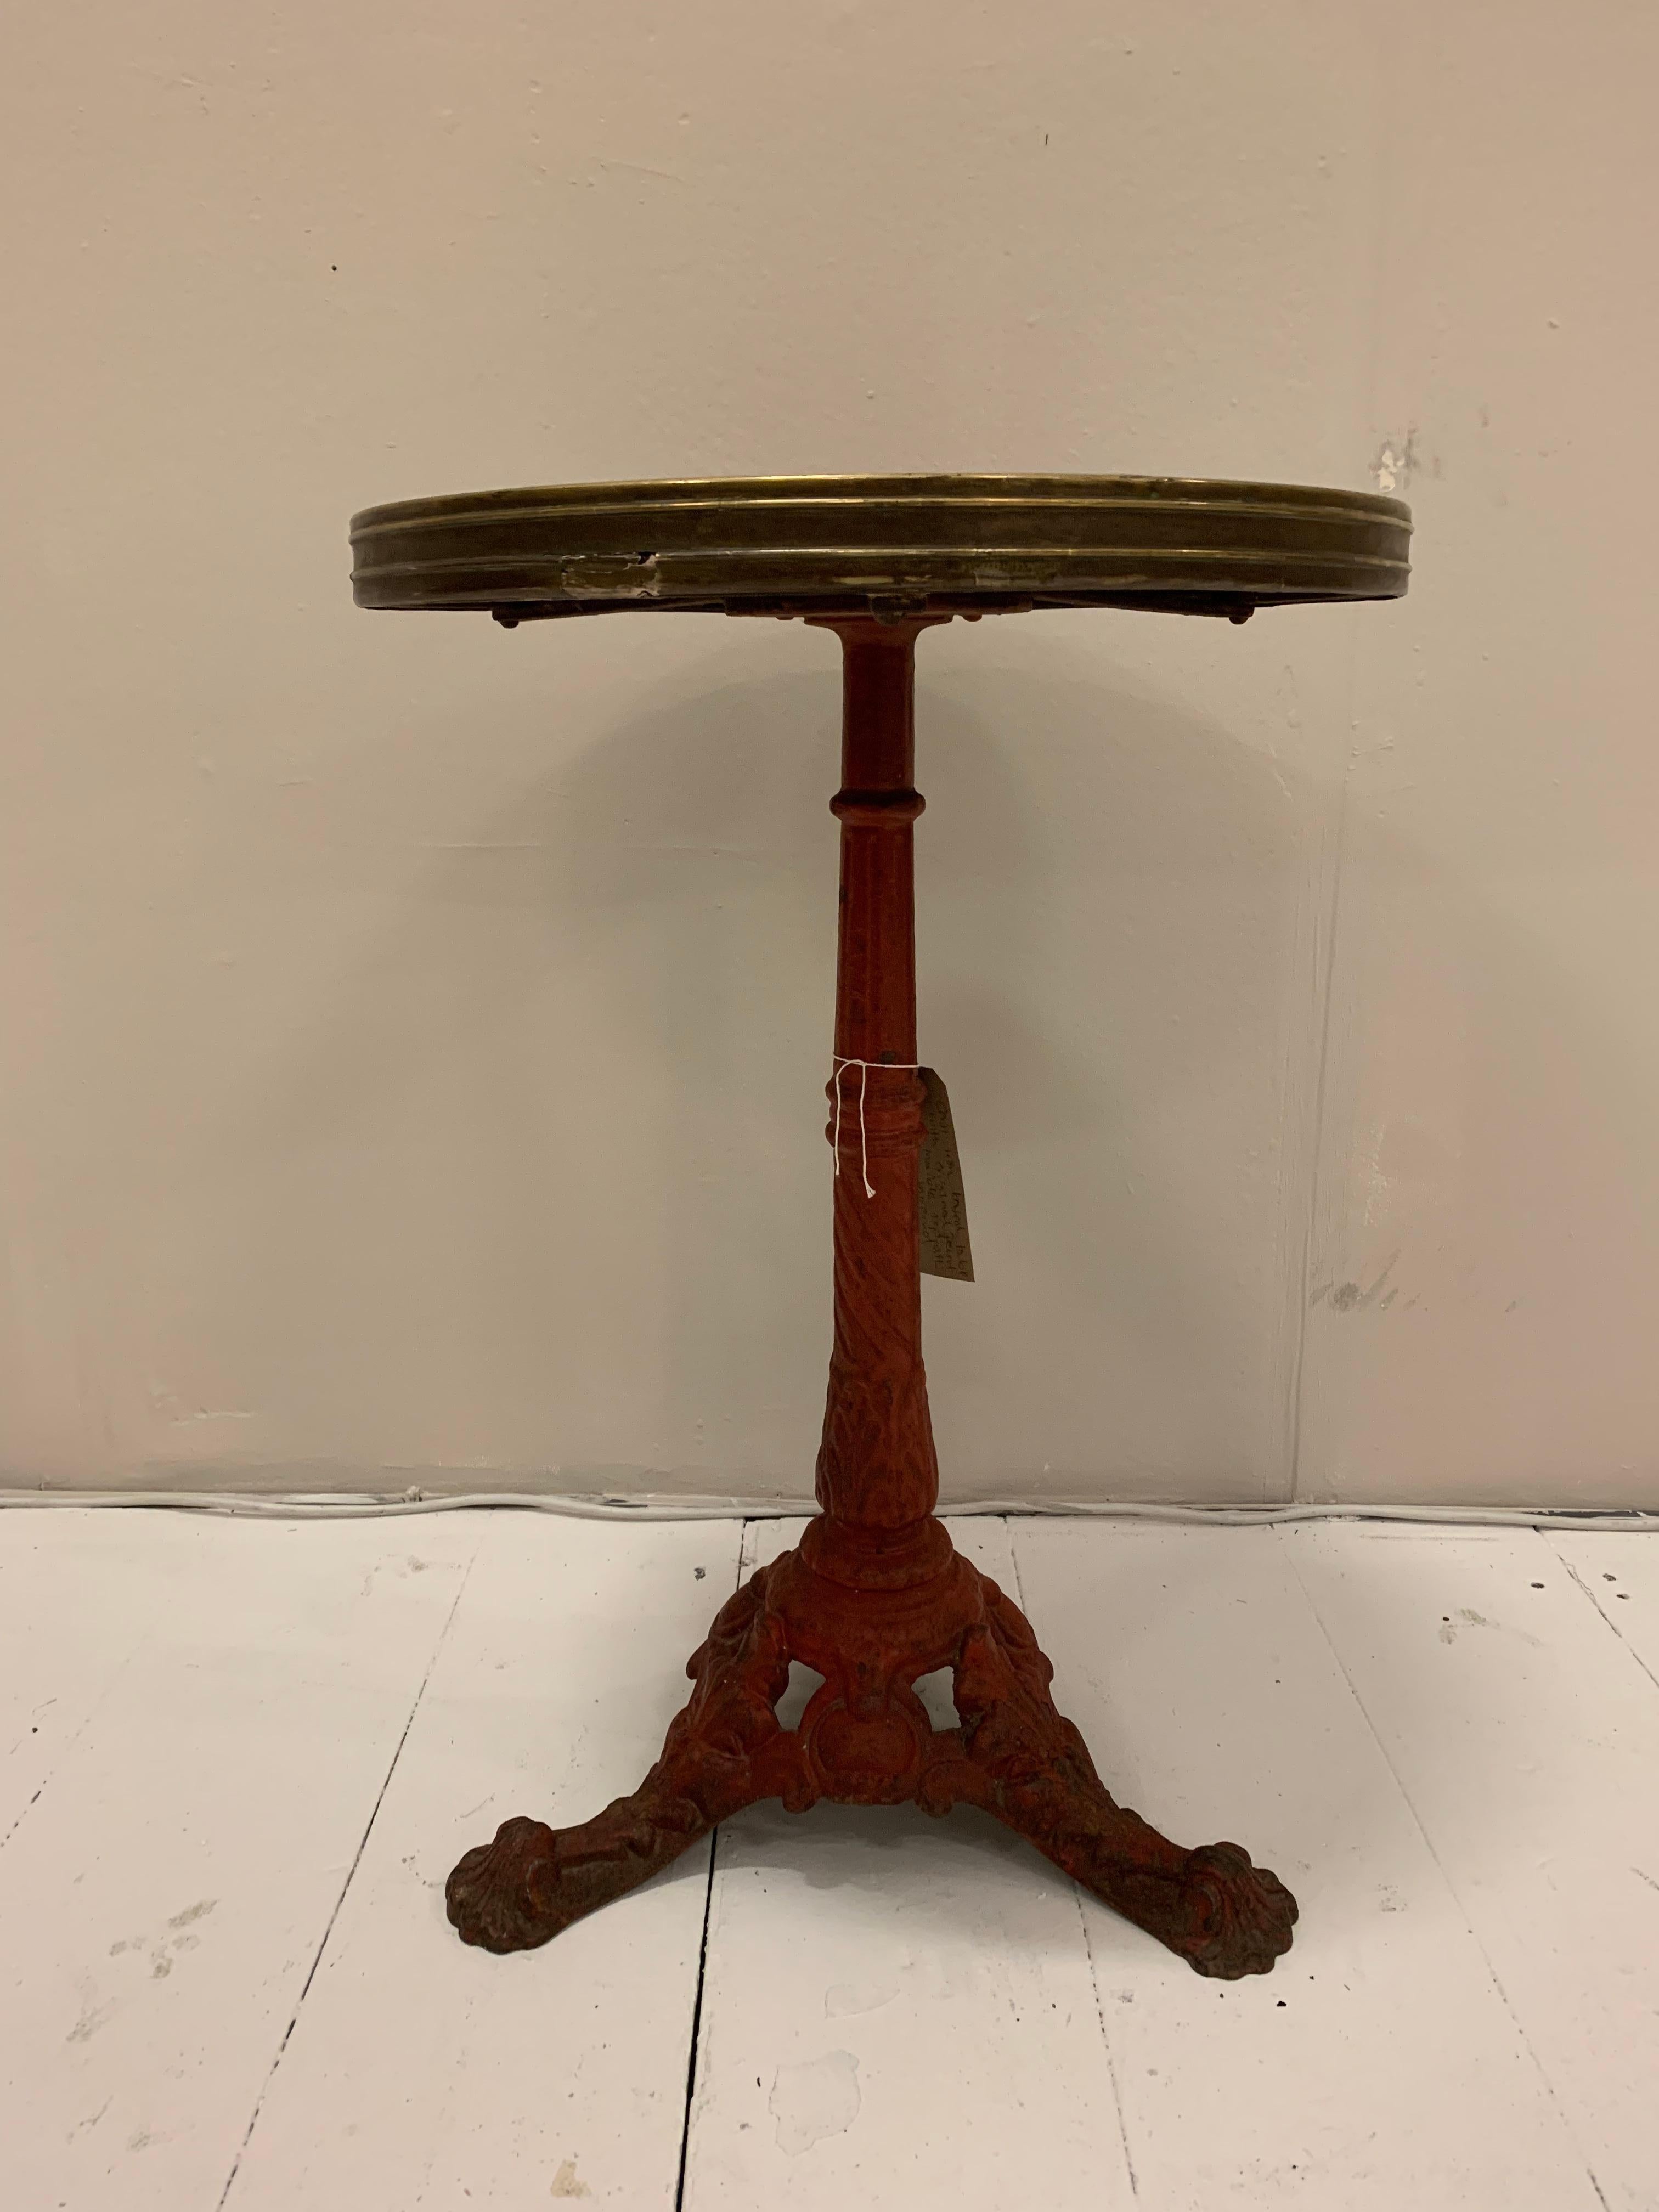 Very good quality French bistro cafe table, circa 1900s

The cast iron base has historic deep red paint with a decorated central column with three splayed feet with interesting scallop detail.
The circular marble top is bound in a reeded brass